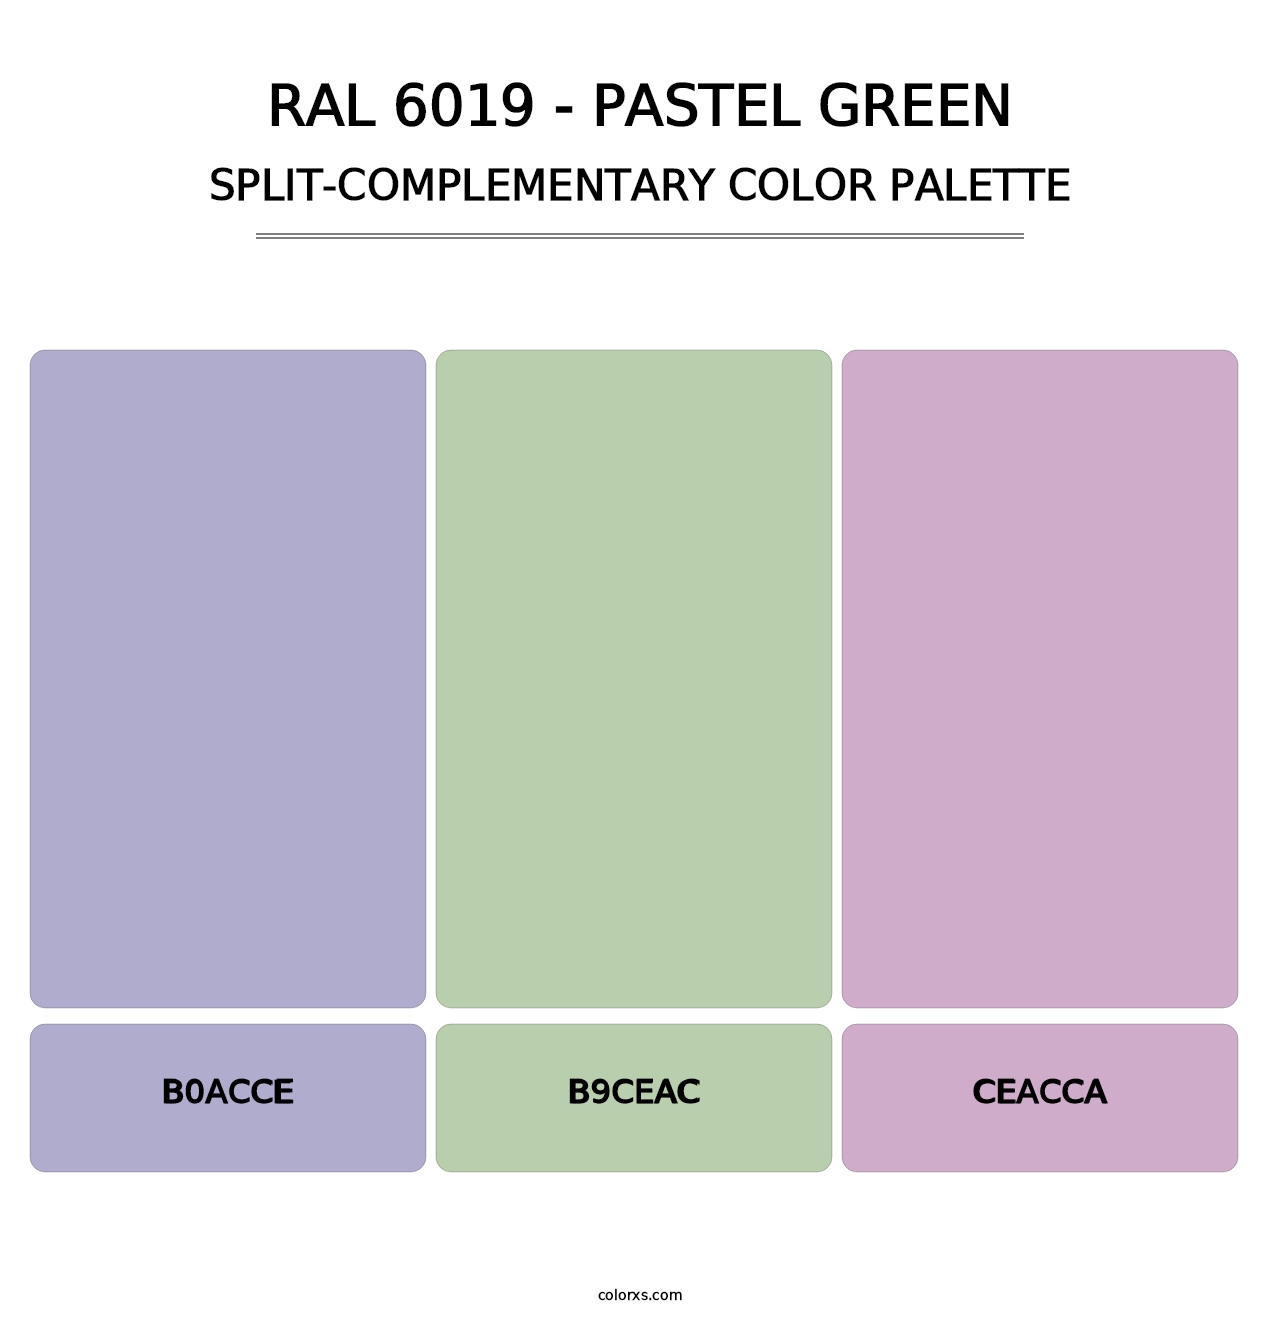 RAL 6019 - Pastel Green - Split-Complementary Color Palette